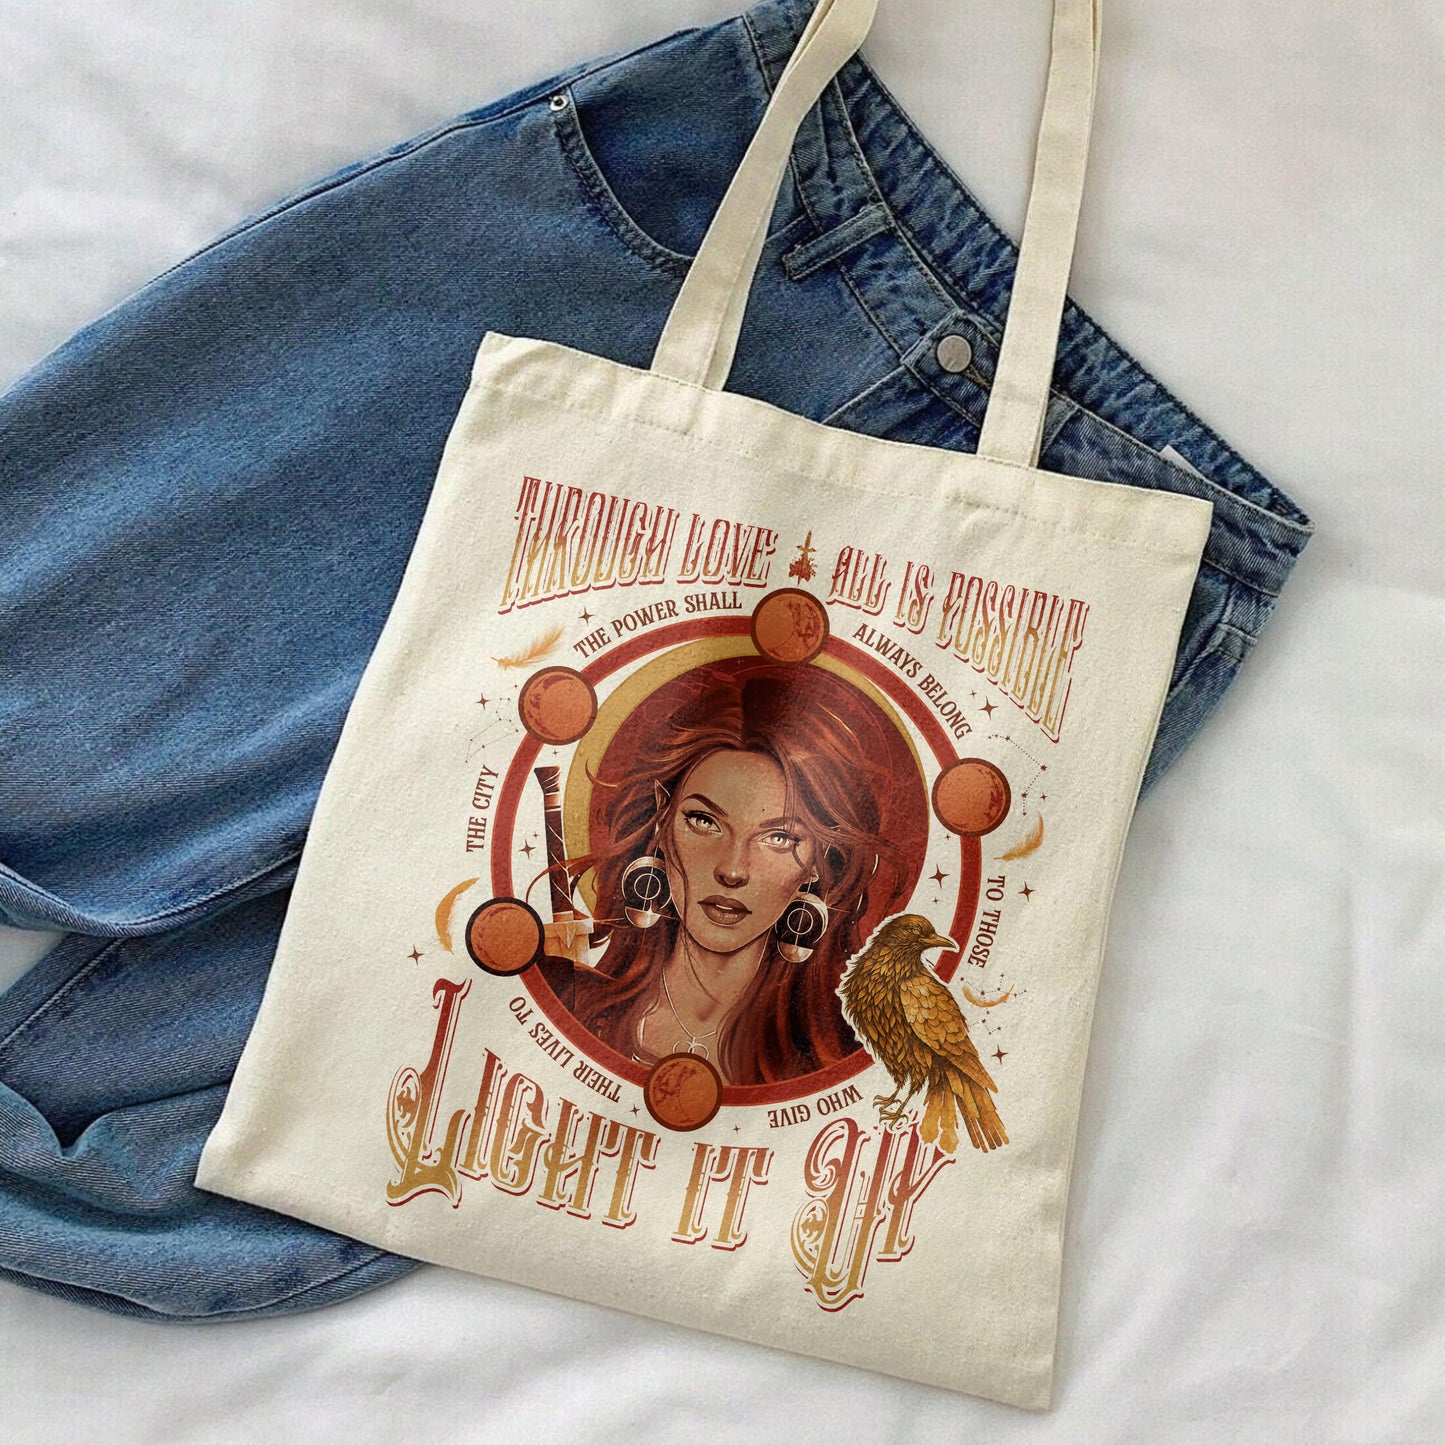 Bryce Quinlan Tote Bag, Bryce Quinlan Crescent City Tote Bag, Gift for Book Lover